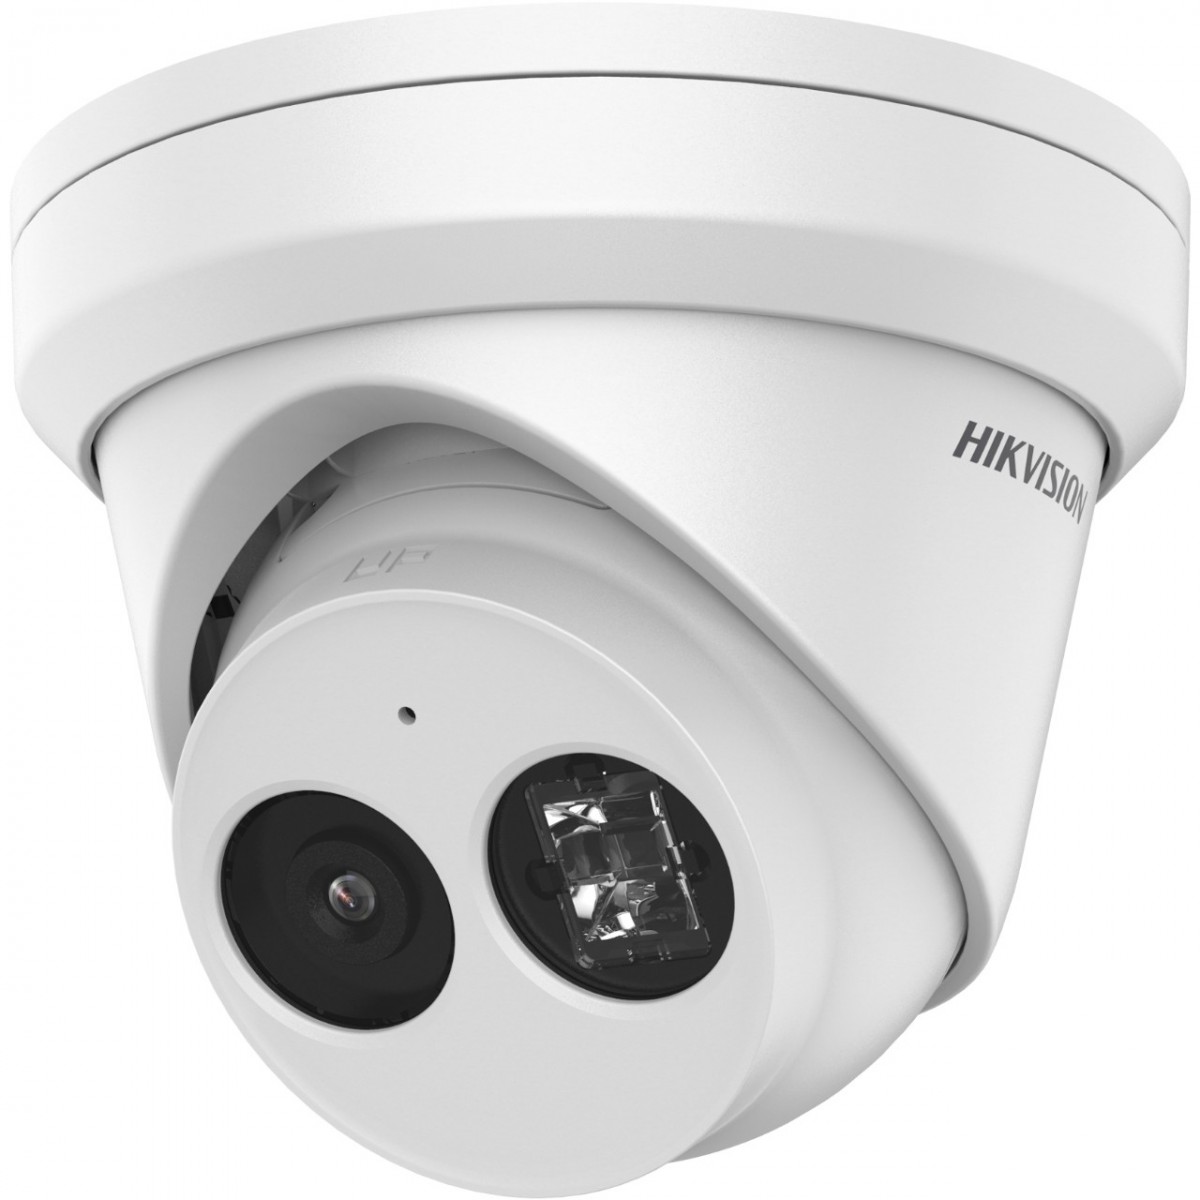 Hikvision Digital Technology DS-2CD2343G2-IU - IP security camera - Outdoor - Wired - FCC SDoC (47 CFR 15 - B); CE-EMC (EN 55032